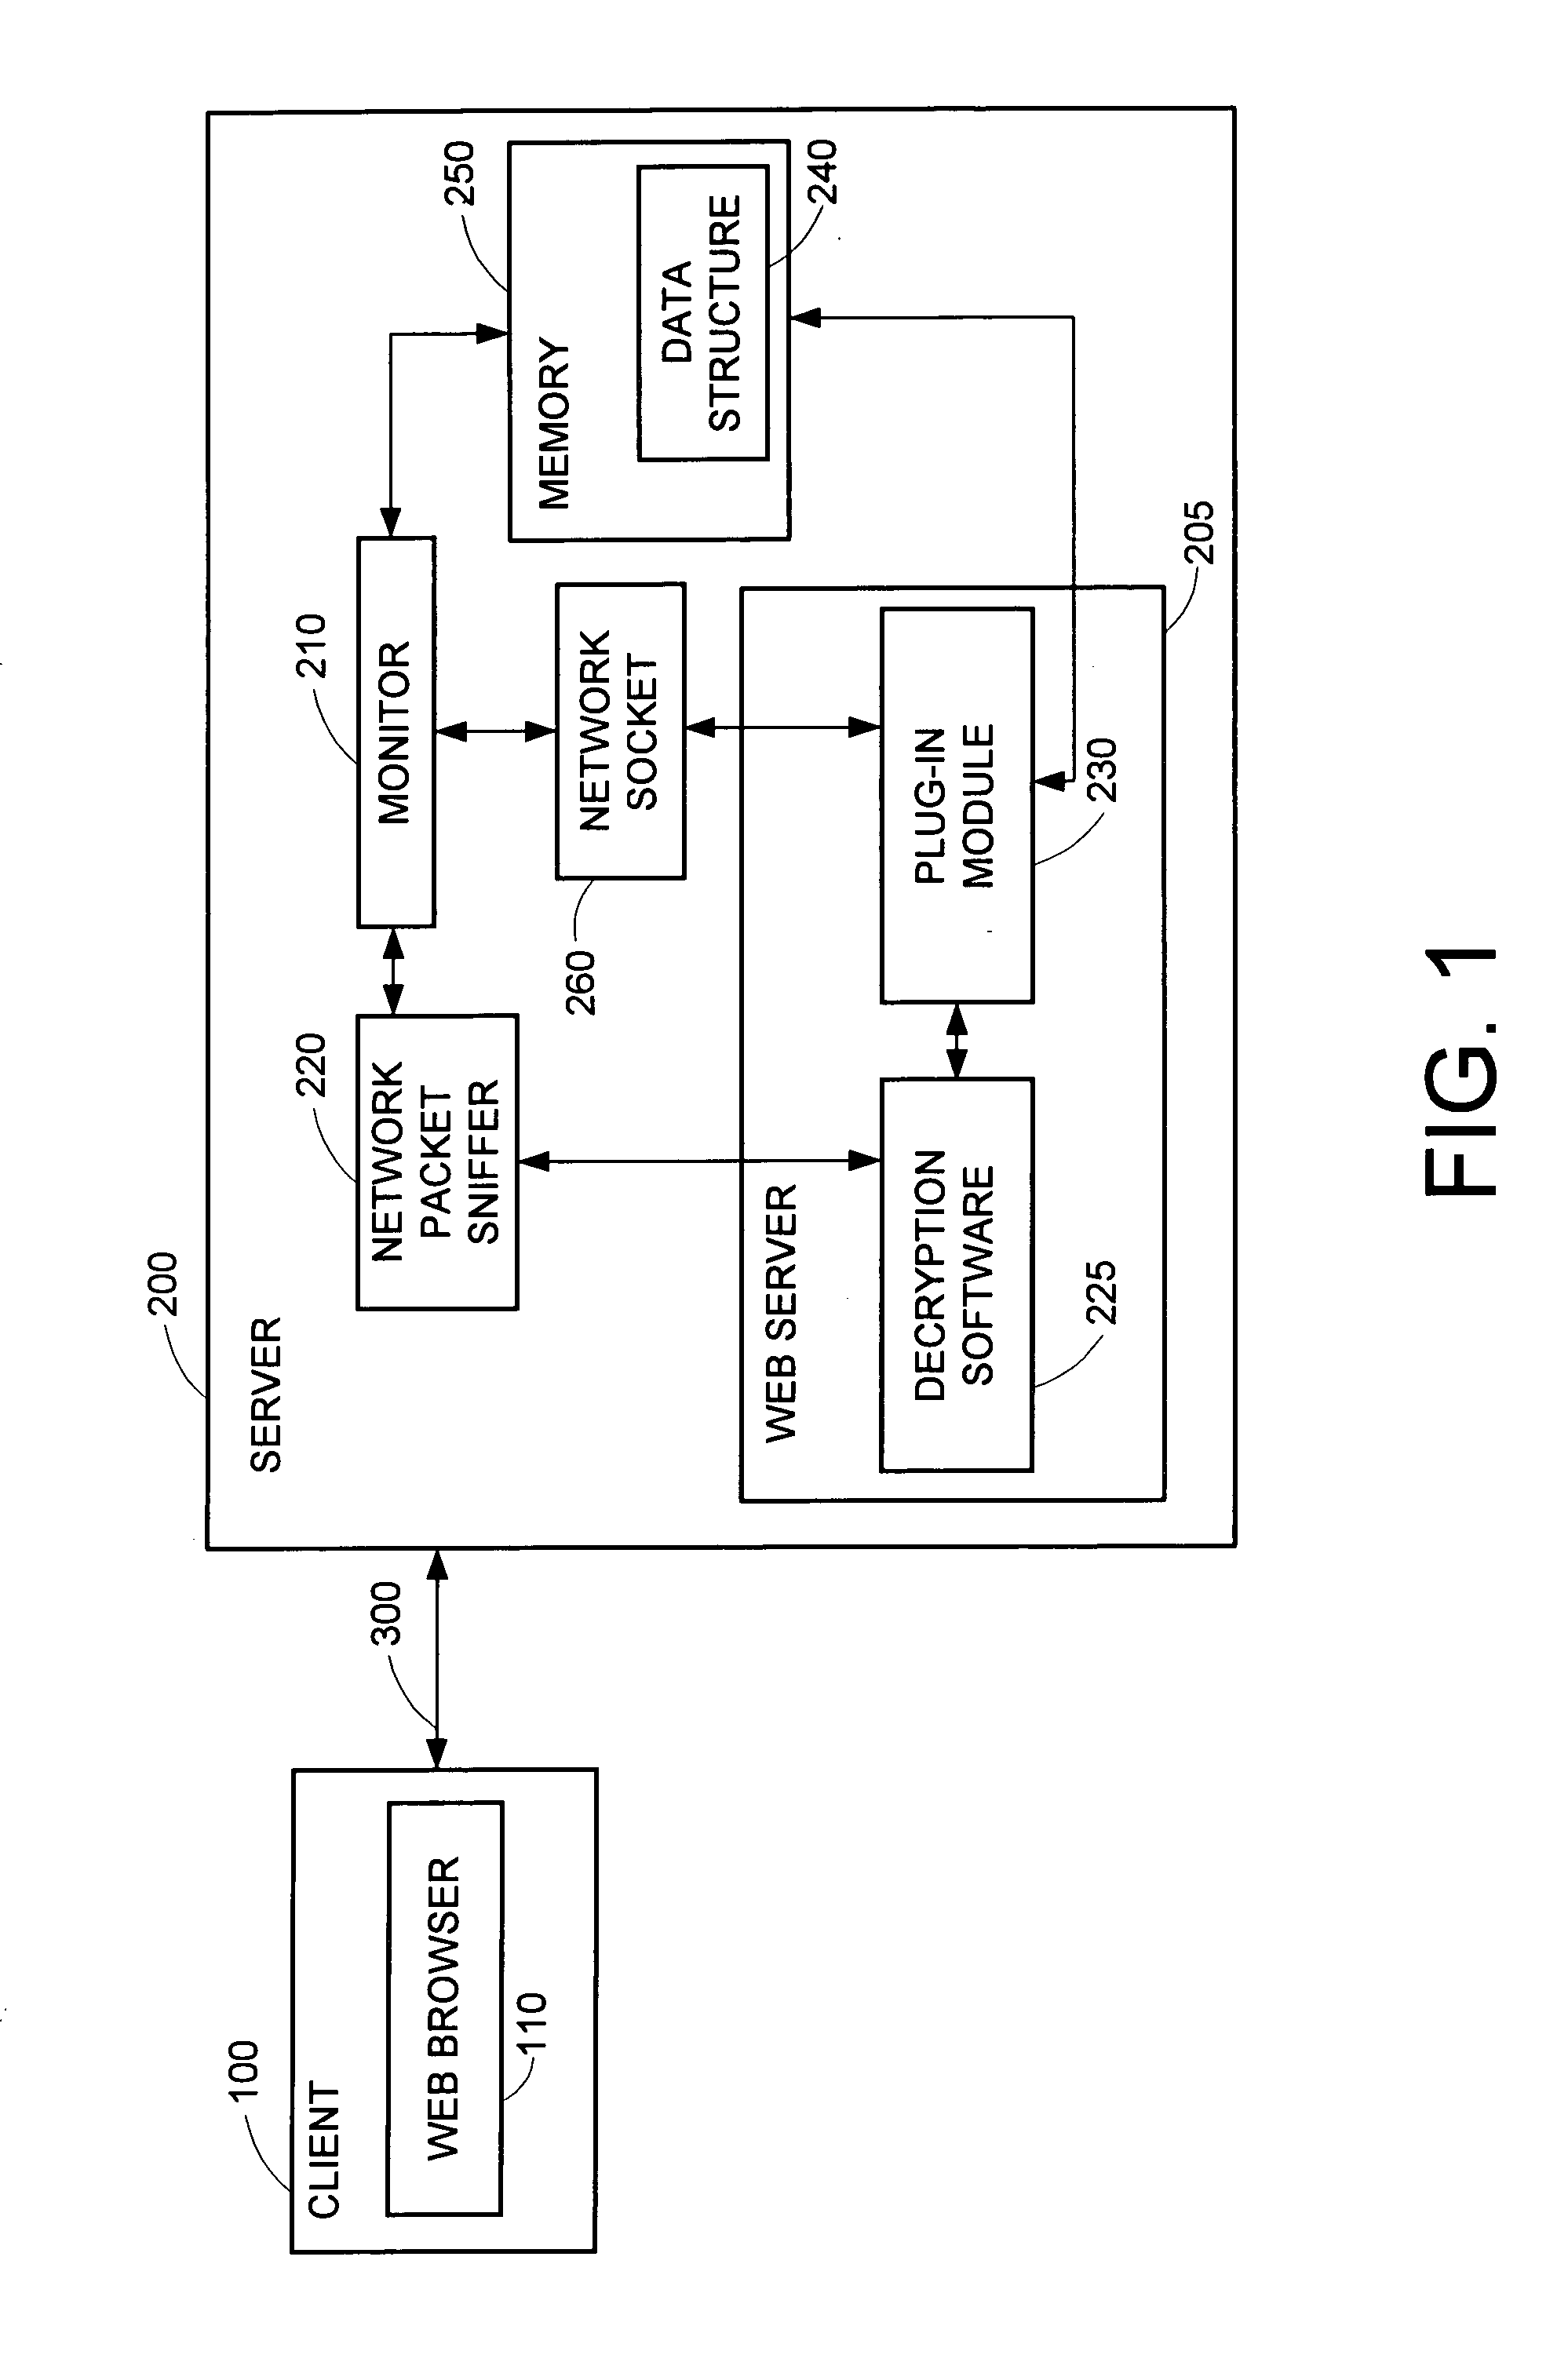 System and method for mapping an encrypted HTTPS network packet to a specific URL name and other data without decryption outside of a secure web server